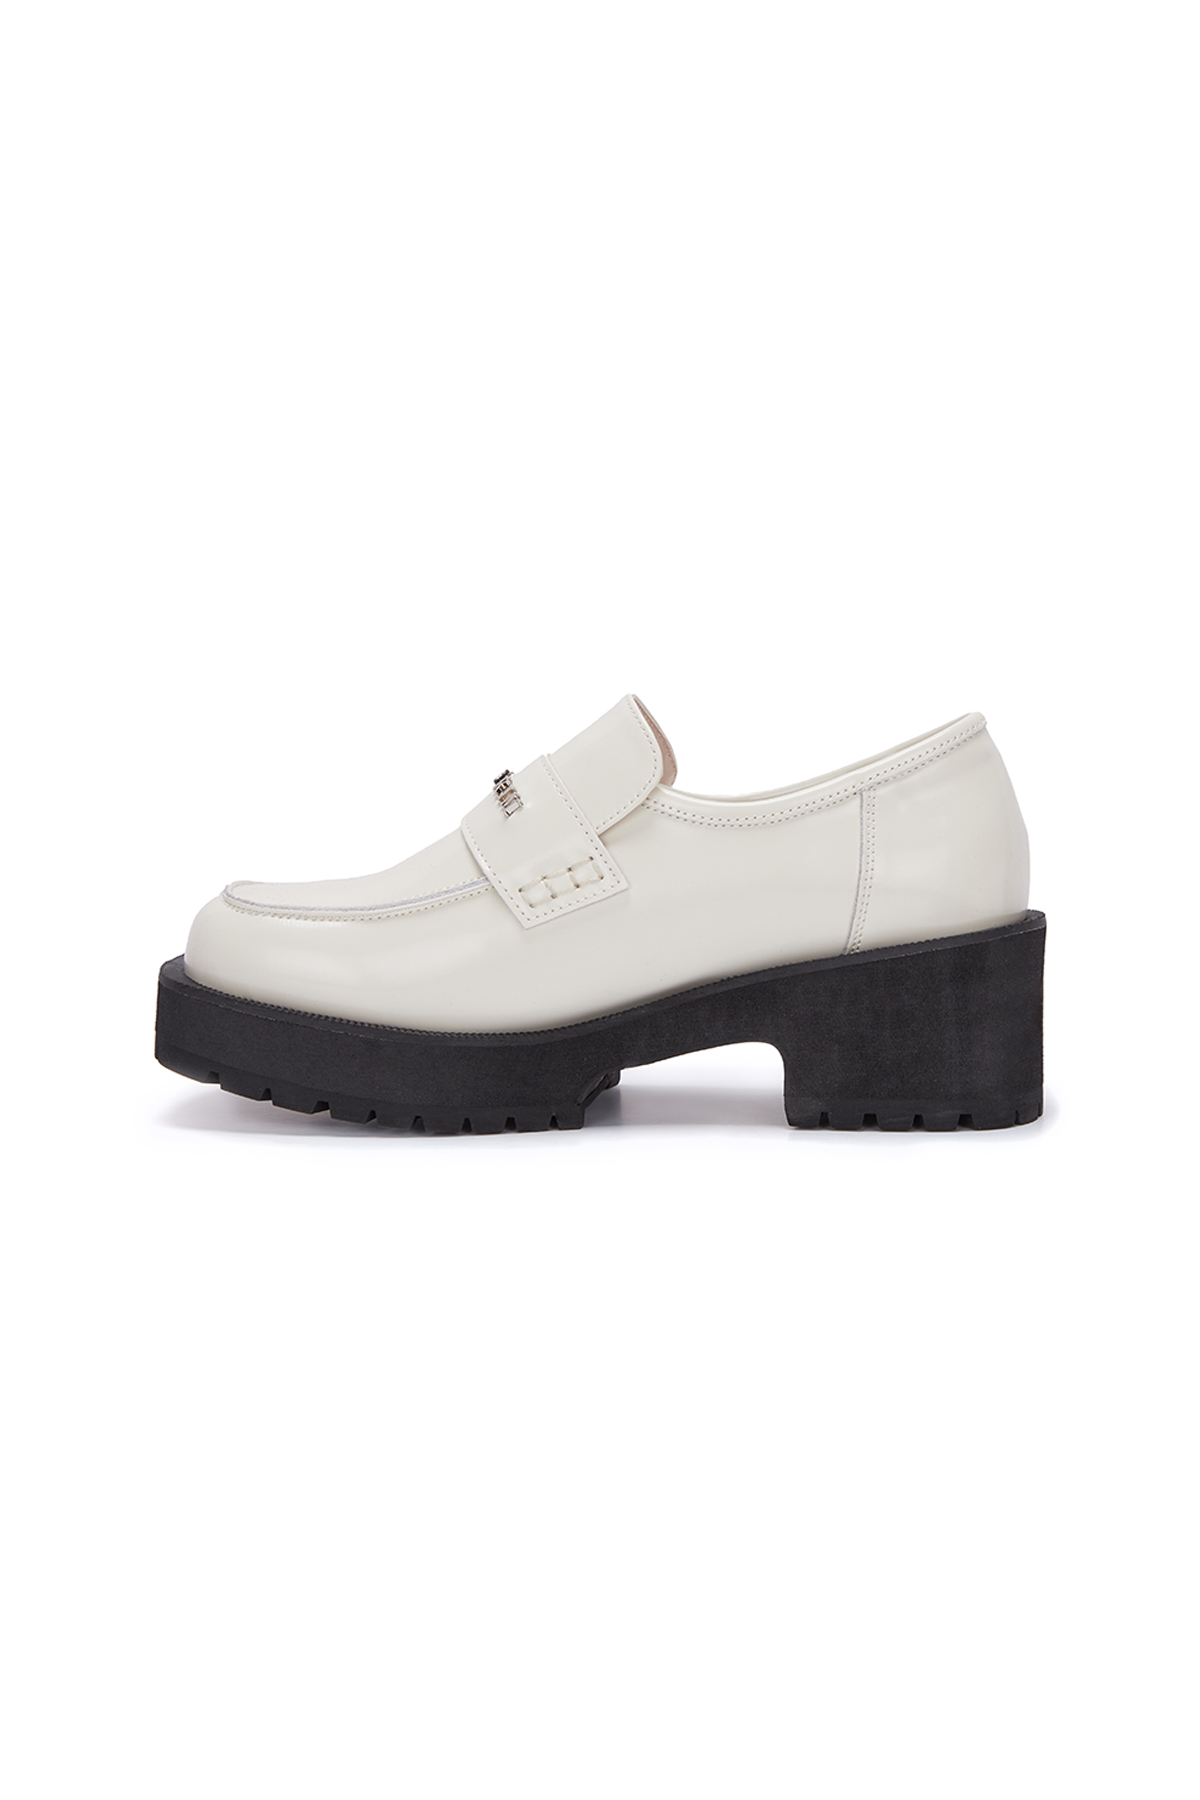 MATIN SQUARE LOAFER IN IVORY